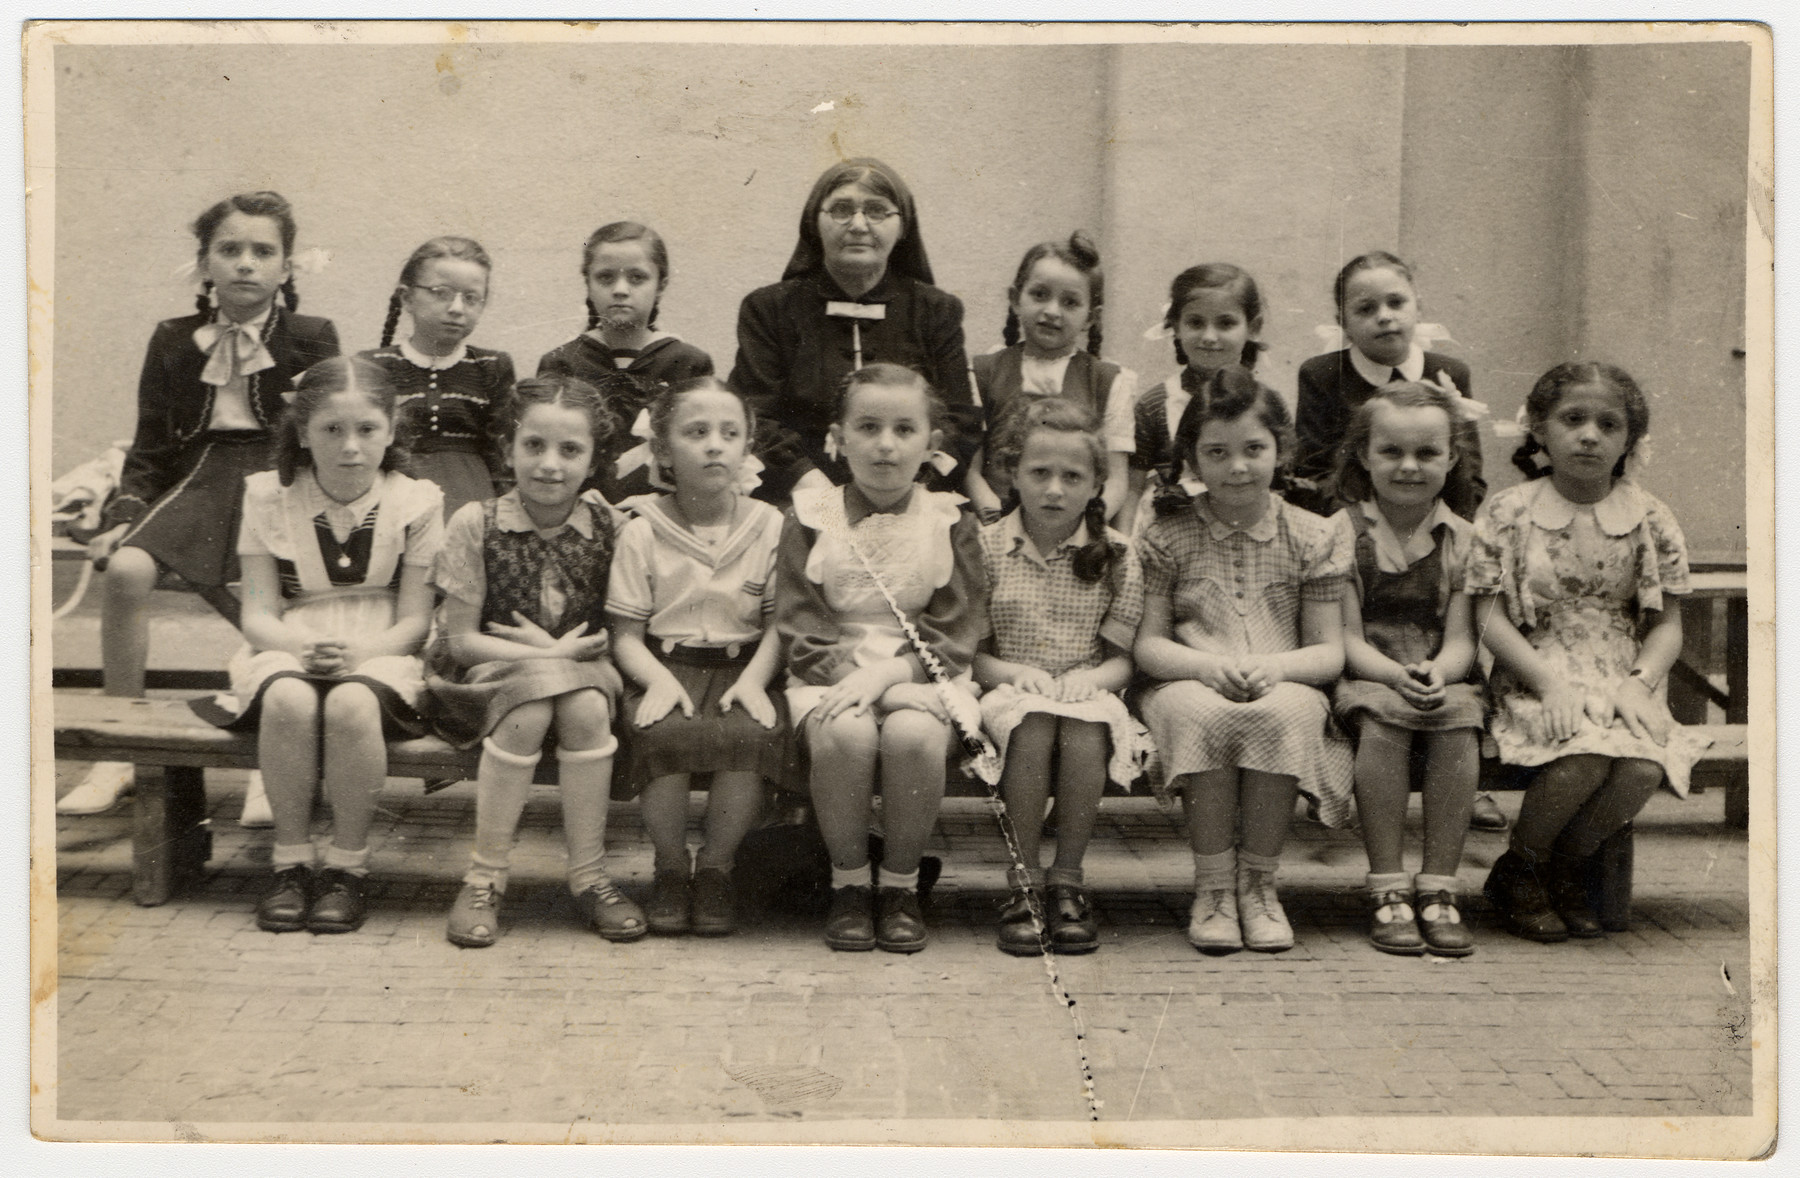 Group portrait of girls in an Orthodox Jewish elementary school in Budapest.

Among those pictured is Zsuzsa Rubin in the back row to the right of the teacher.